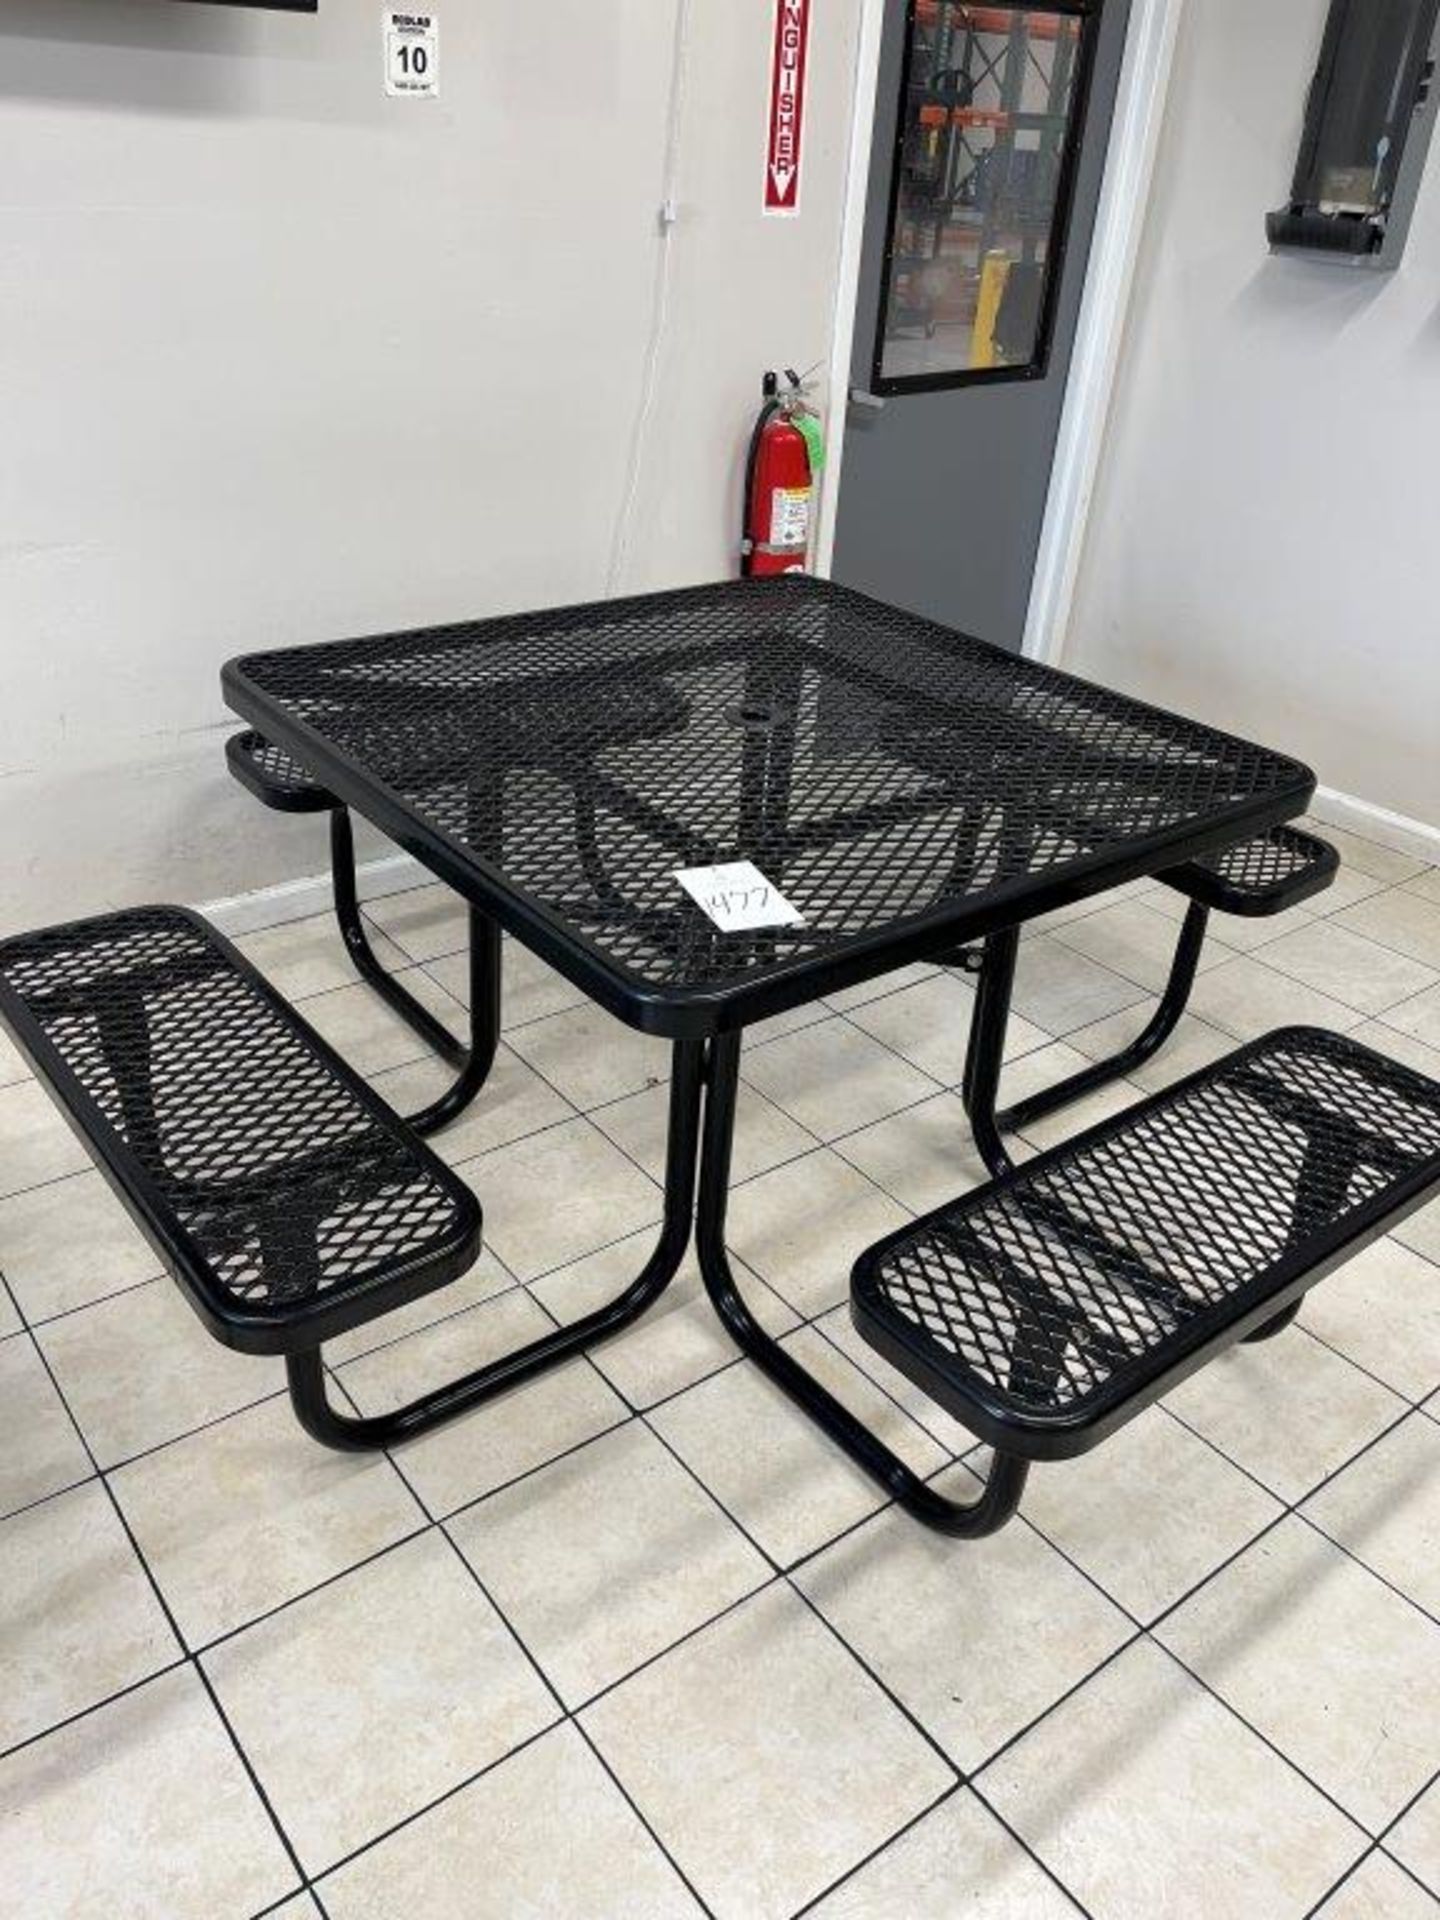 Uline 46" x 46" Rubber Coated Picnic Table